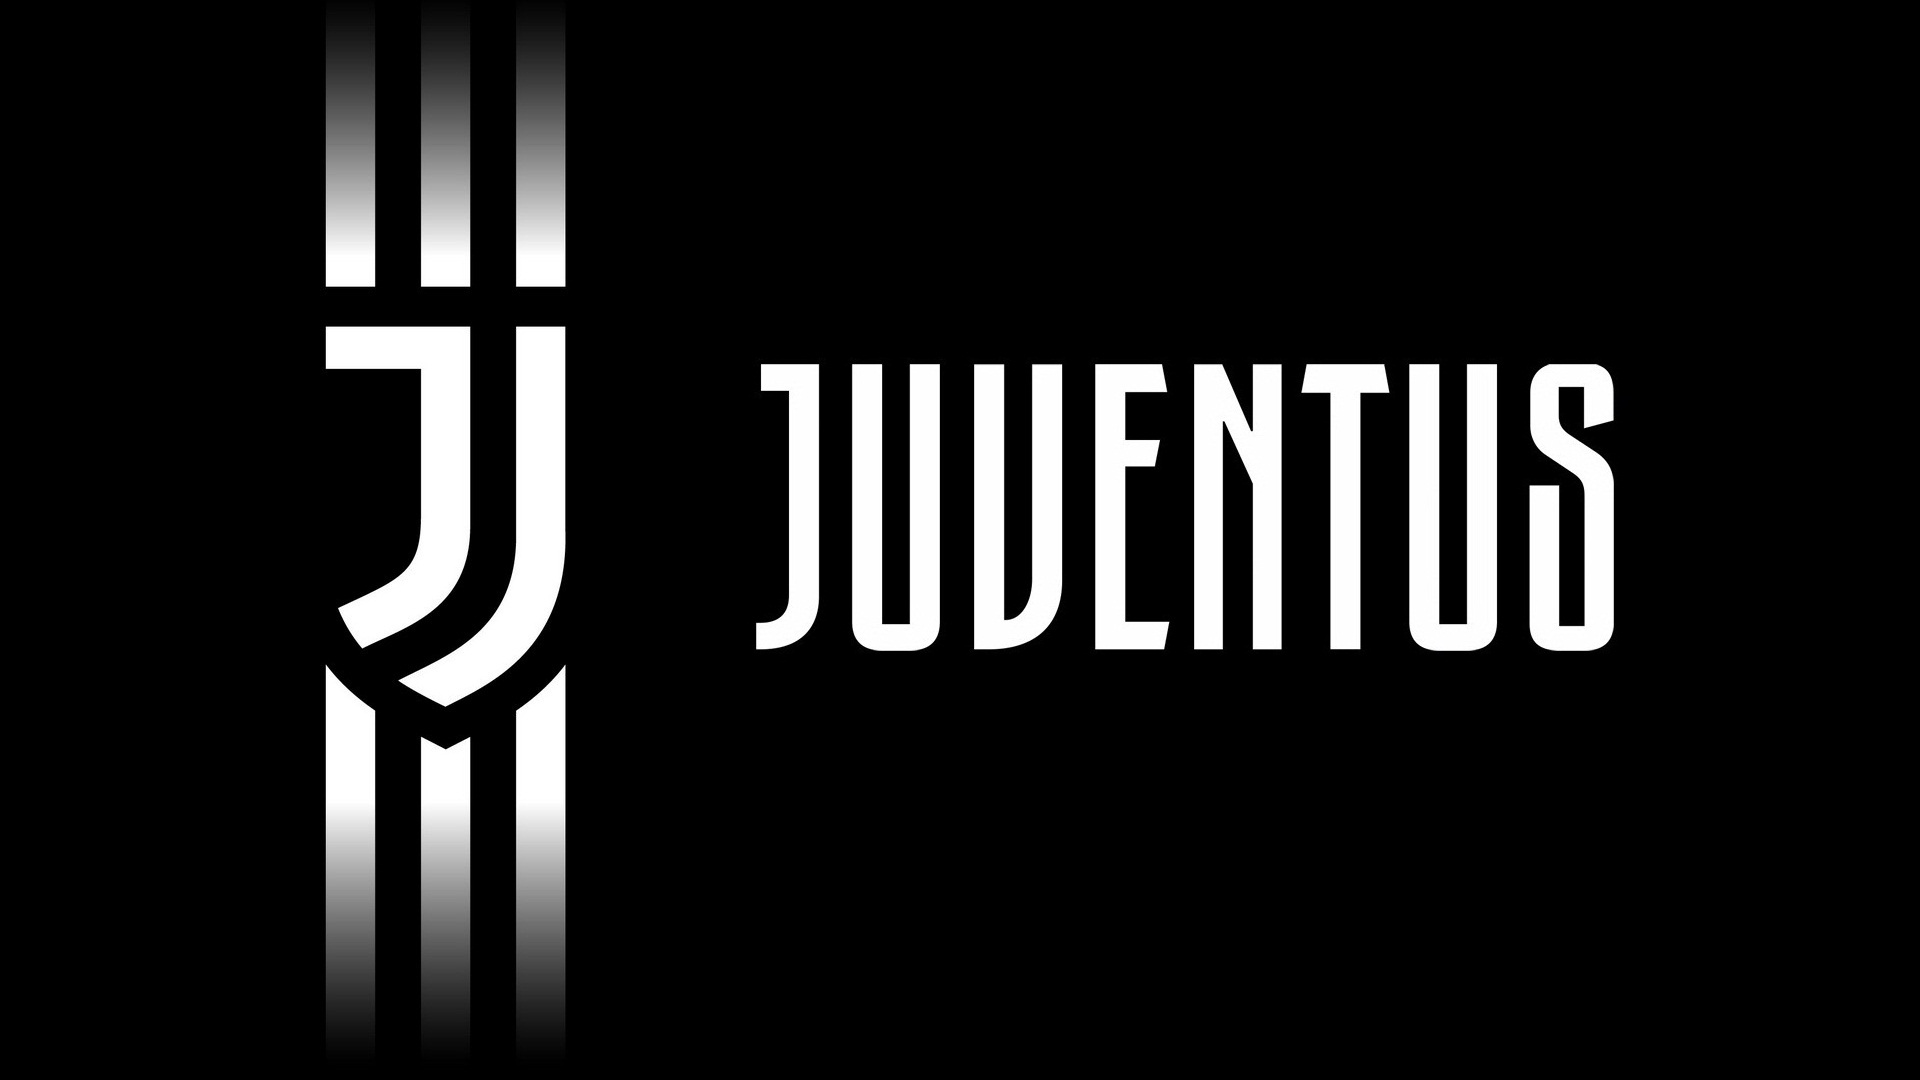 Wallpaper Desktop Juventus Soccer HD with resolution 1920x1080 pixel. You can make this wallpaper for your Mac or Windows Desktop Background, iPhone, Android or Tablet and another Smartphone device